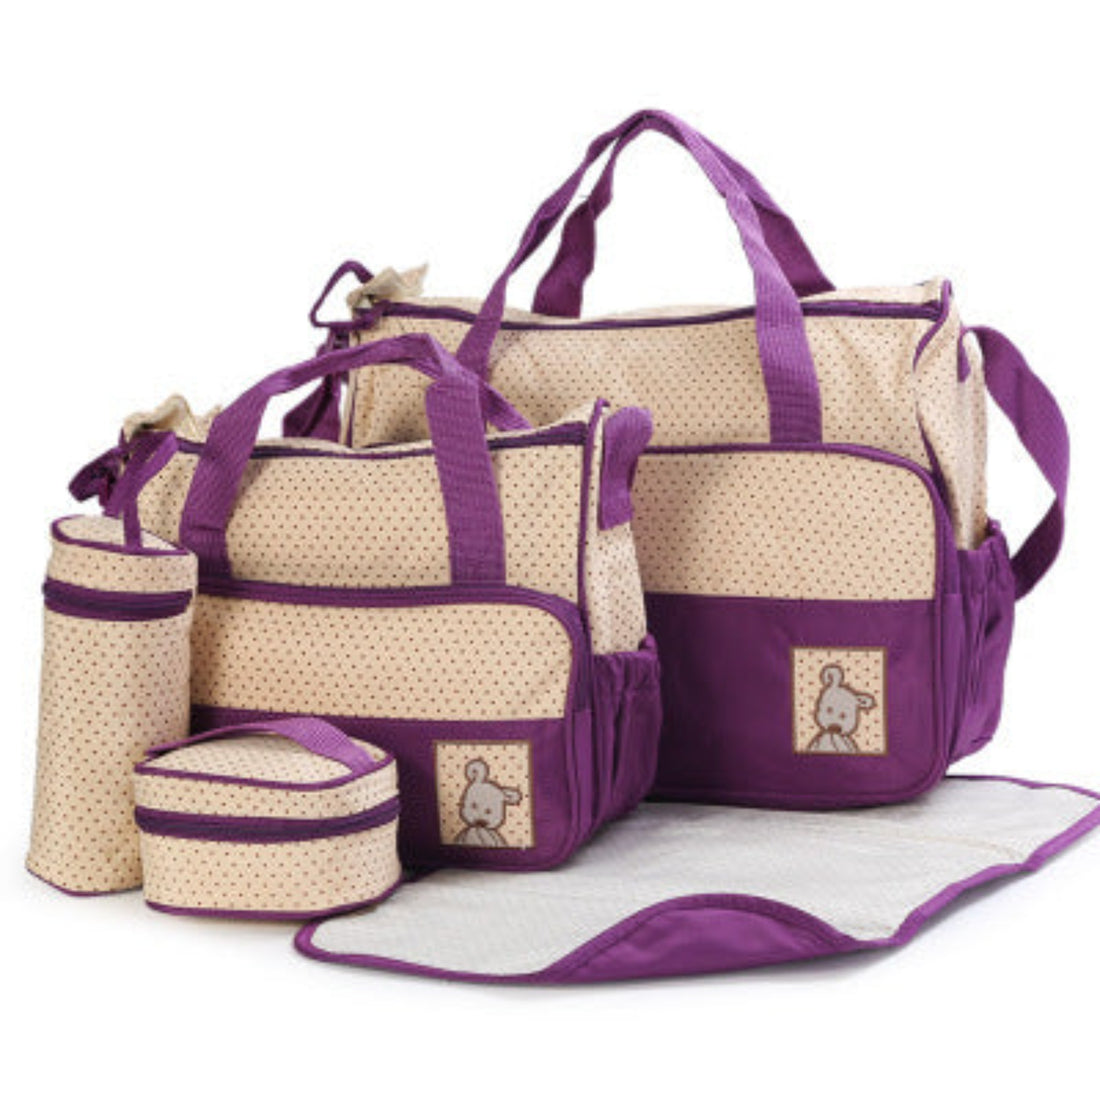 Diaper bag with stroller straps